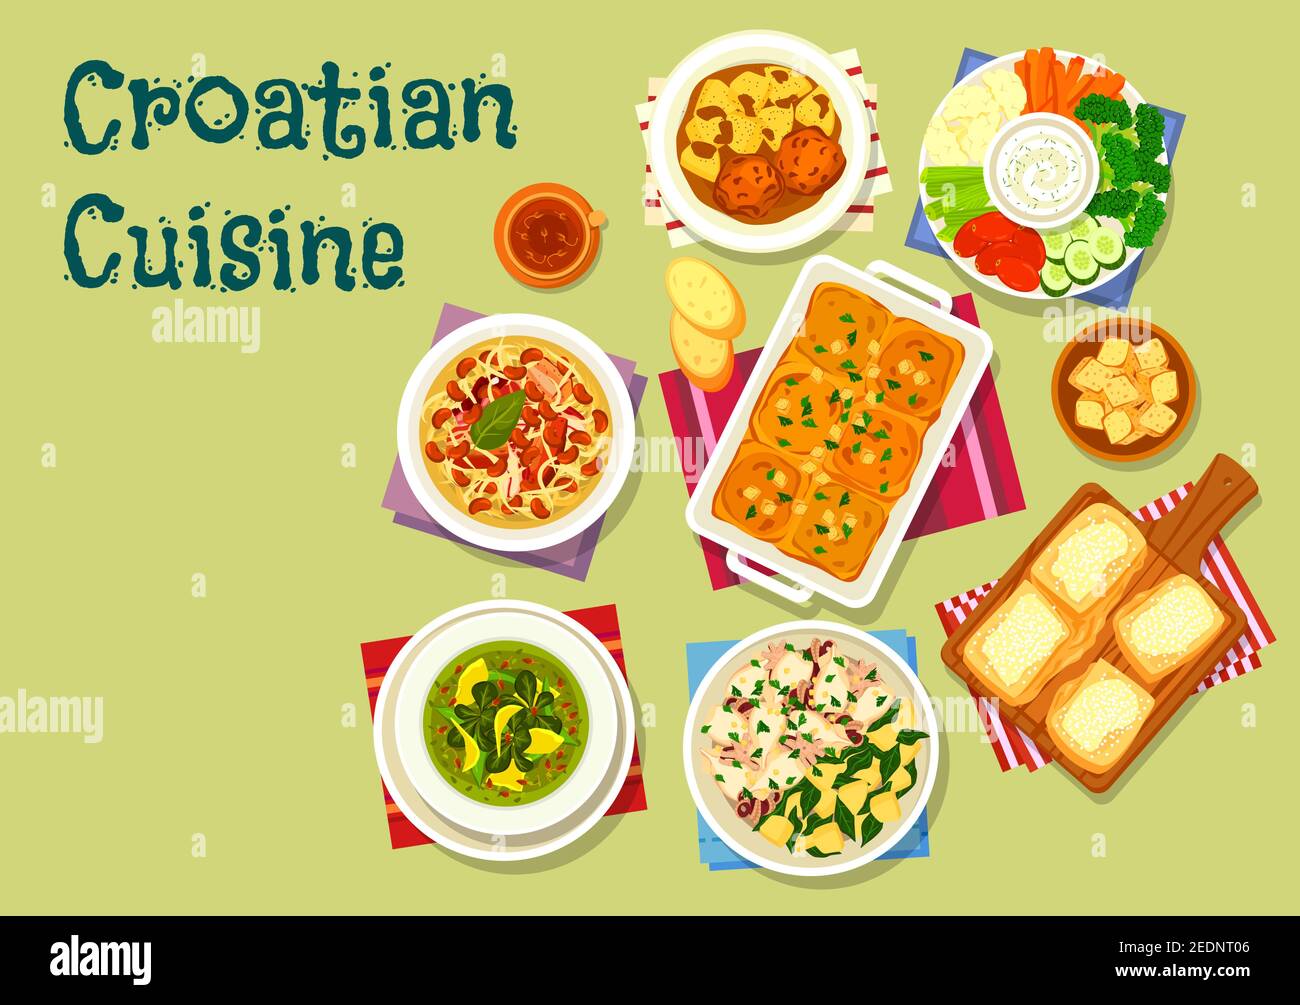 Croatian cuisine lunch icon of squid with potato, meatball in tomato sauce, bean cabbage stew with meat, spinach cream soup, sour cream sauce with veg Stock Vector